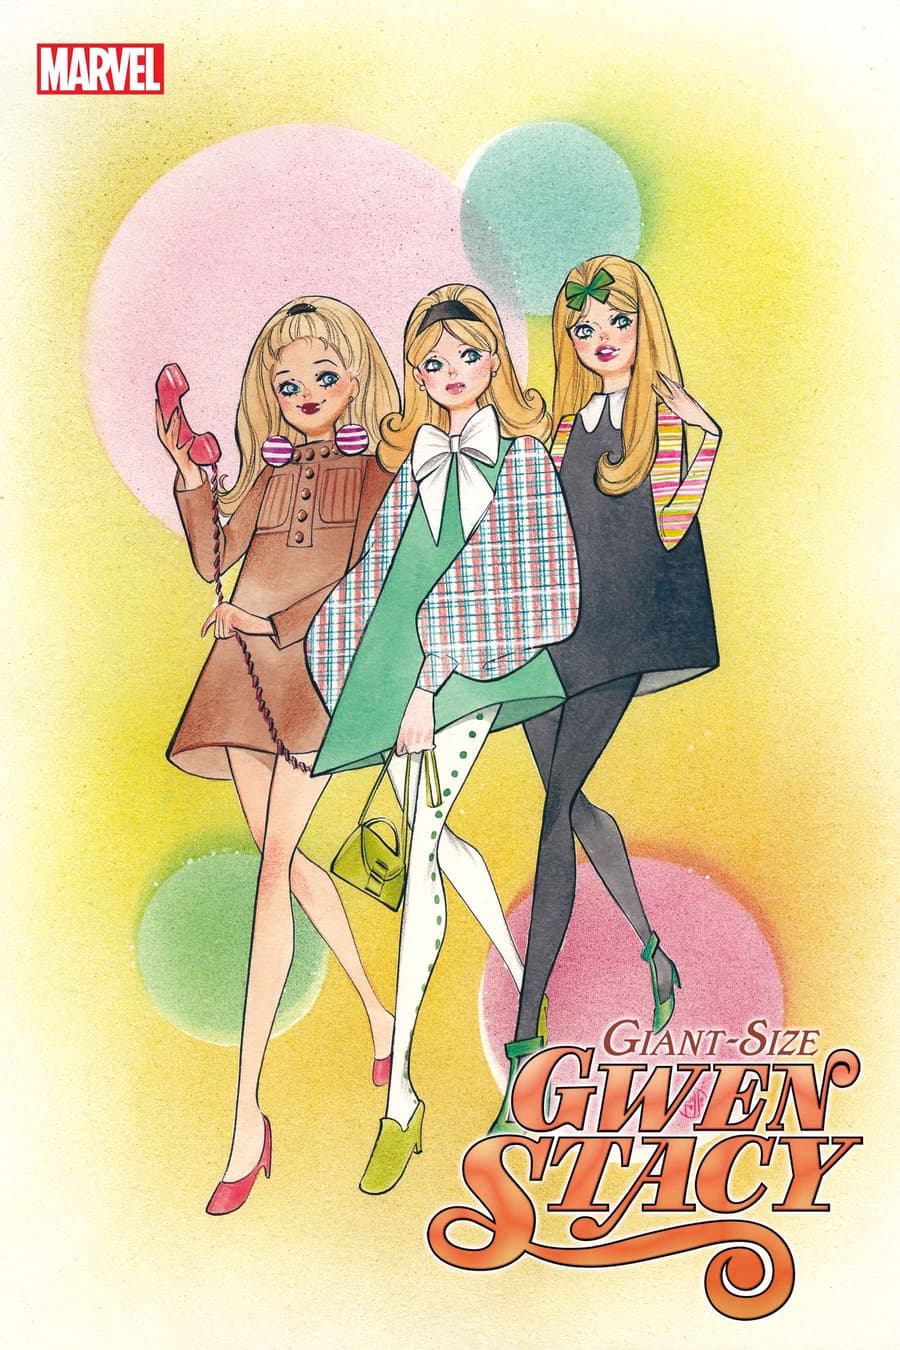 GIANT-SIZE GWEN STACY #1 variant cover by Peach Momoko